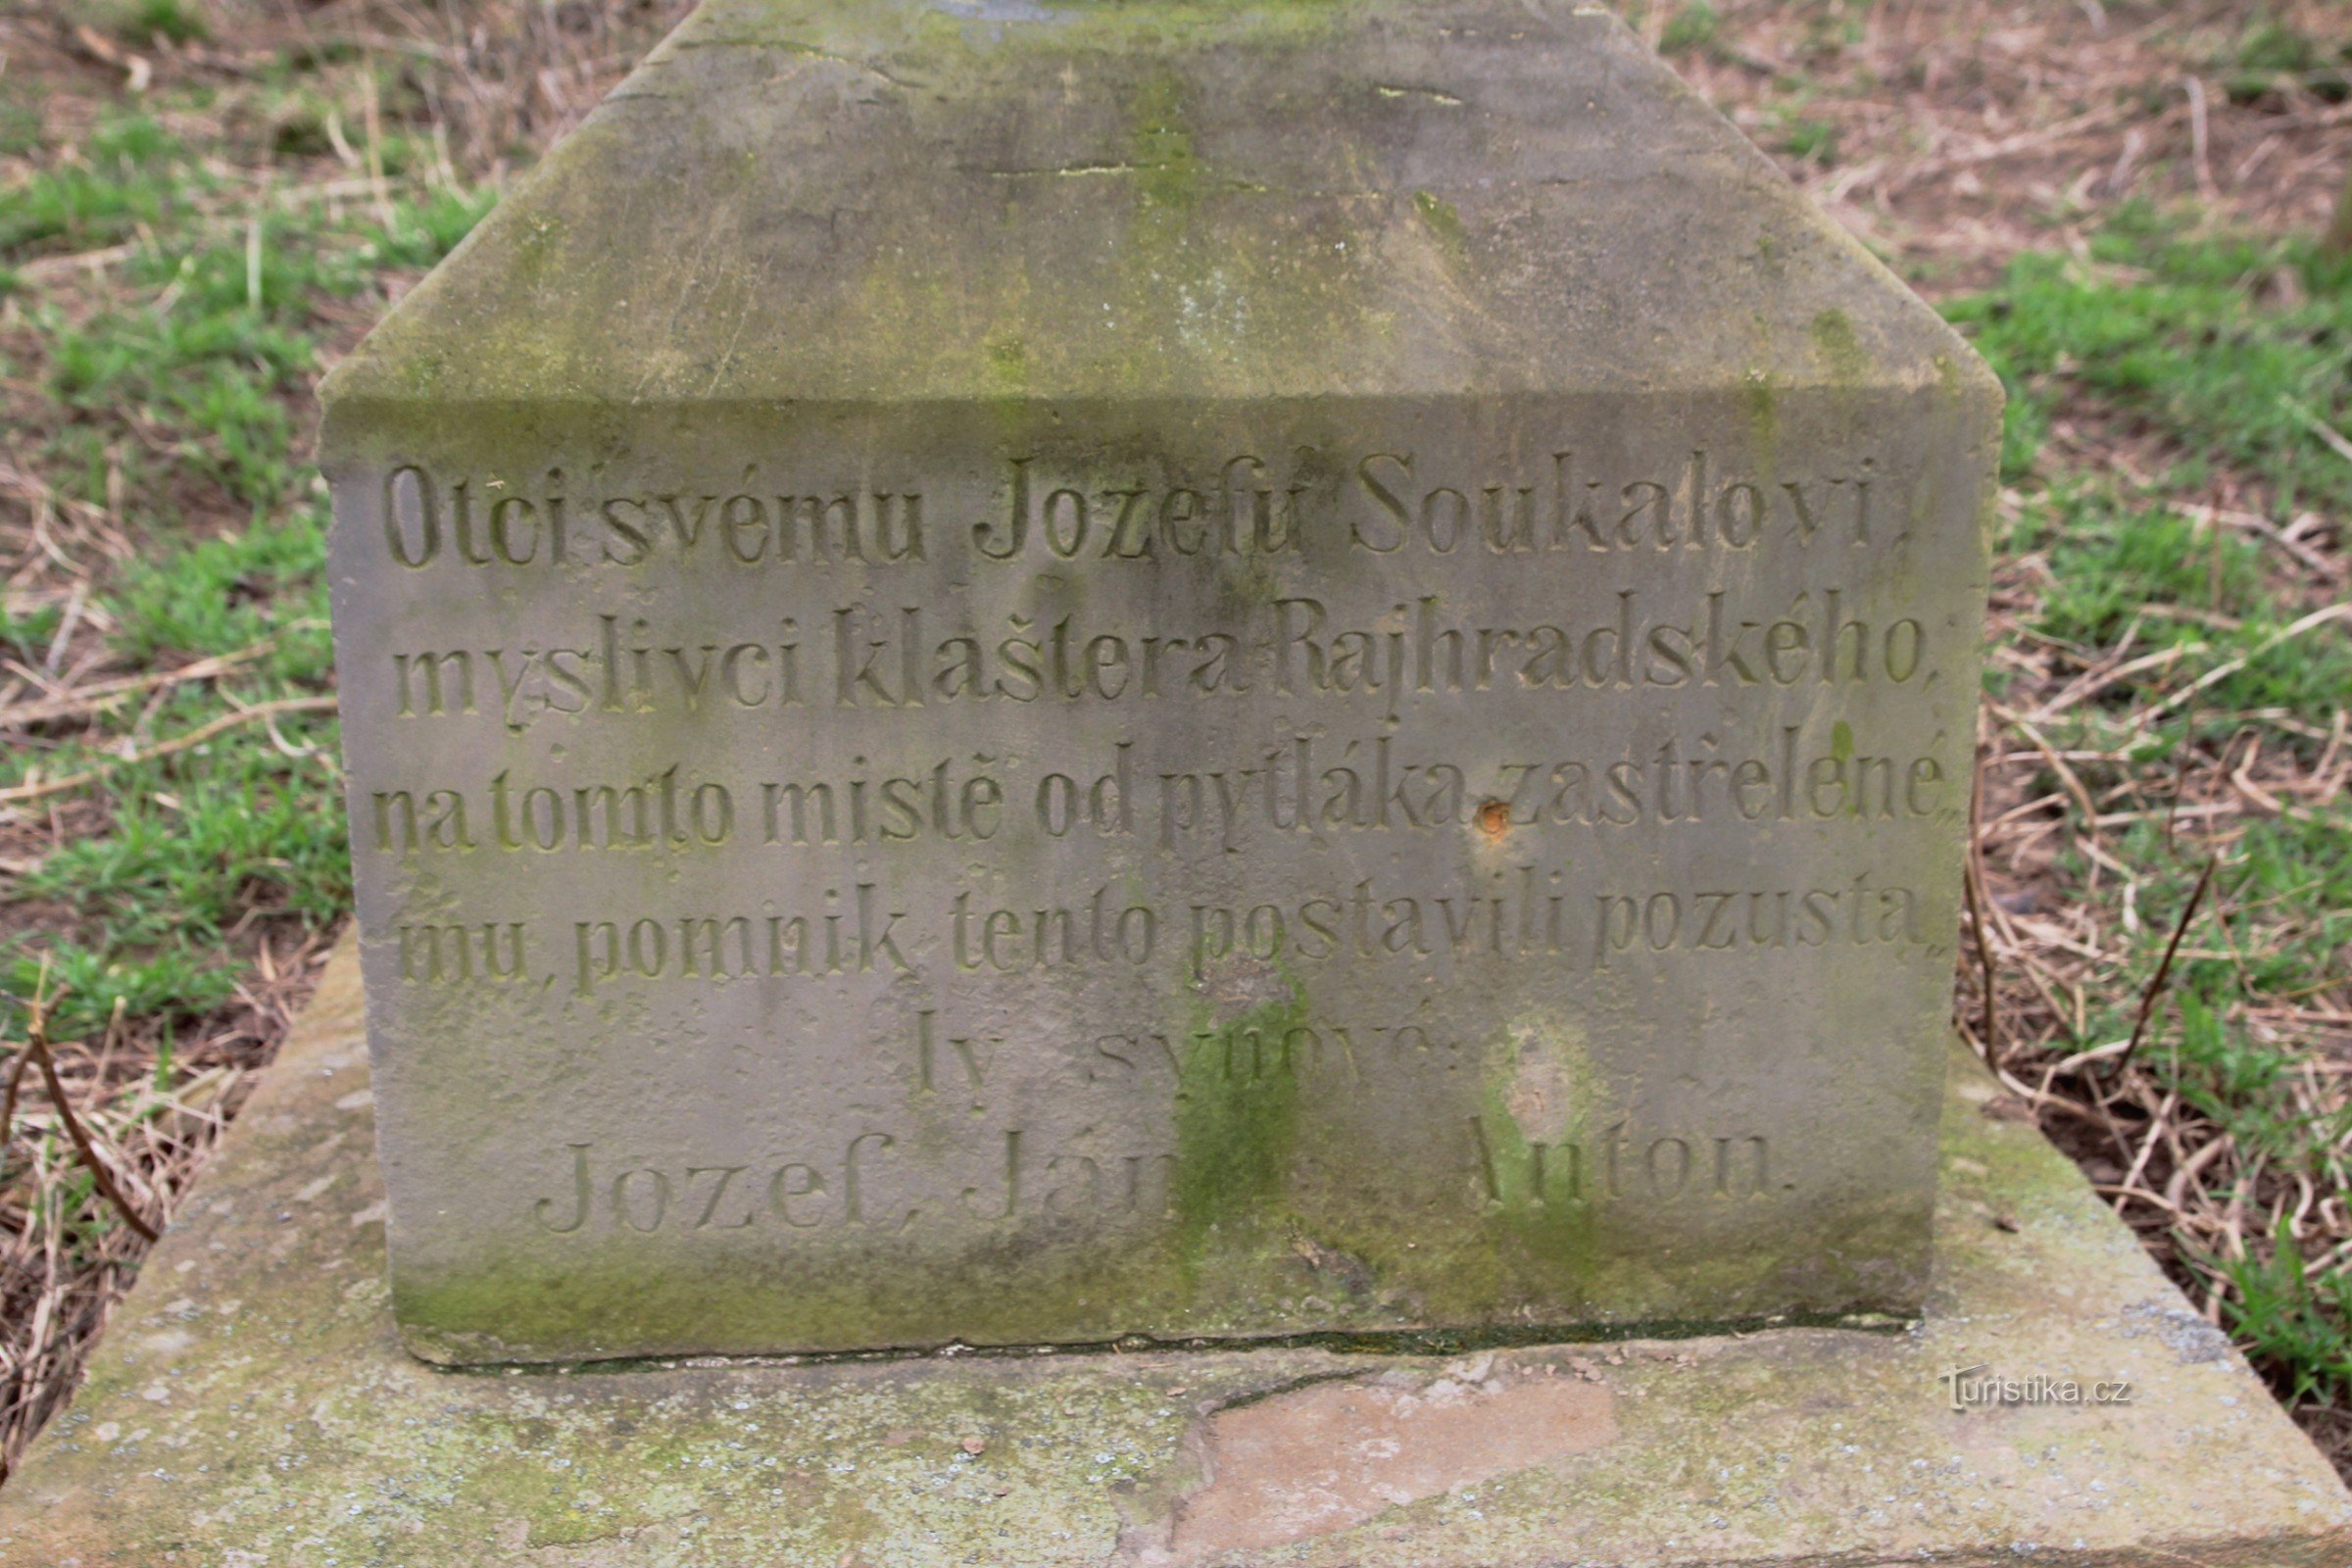 Detail of the inscription on the monument